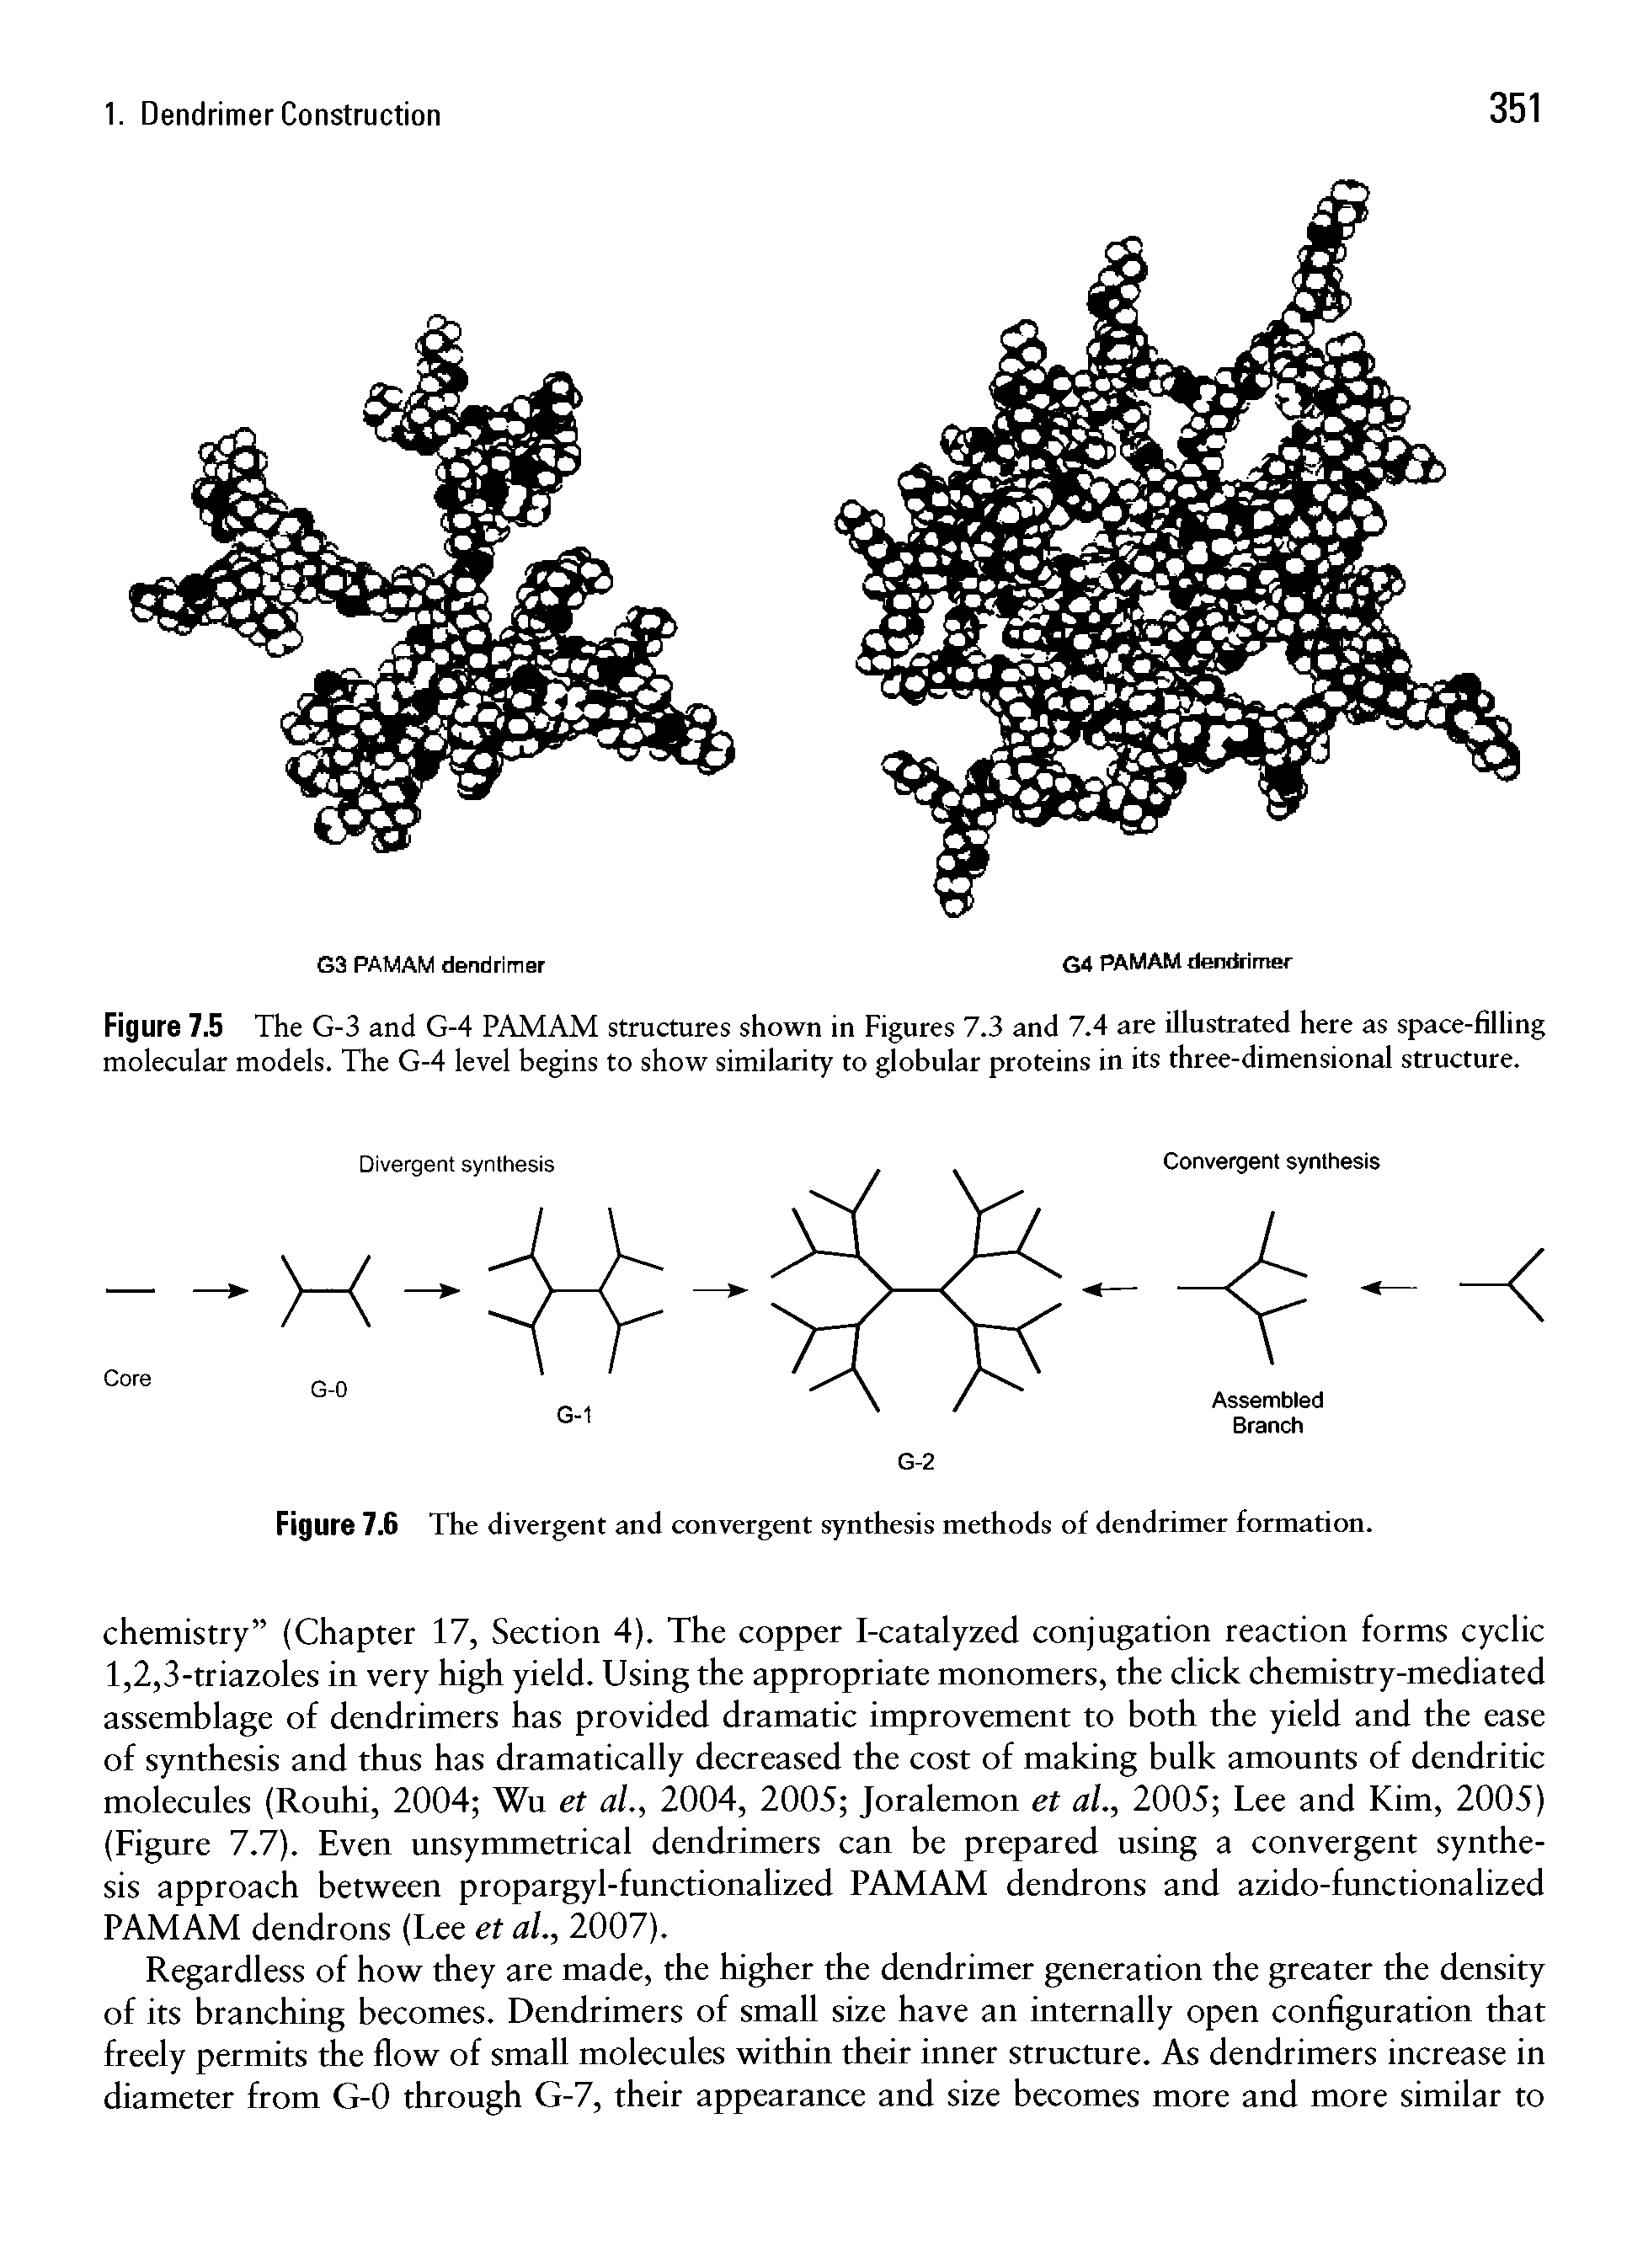 Figure 7.6 The divergent and convergent synthesis methods of dendrimer formation.